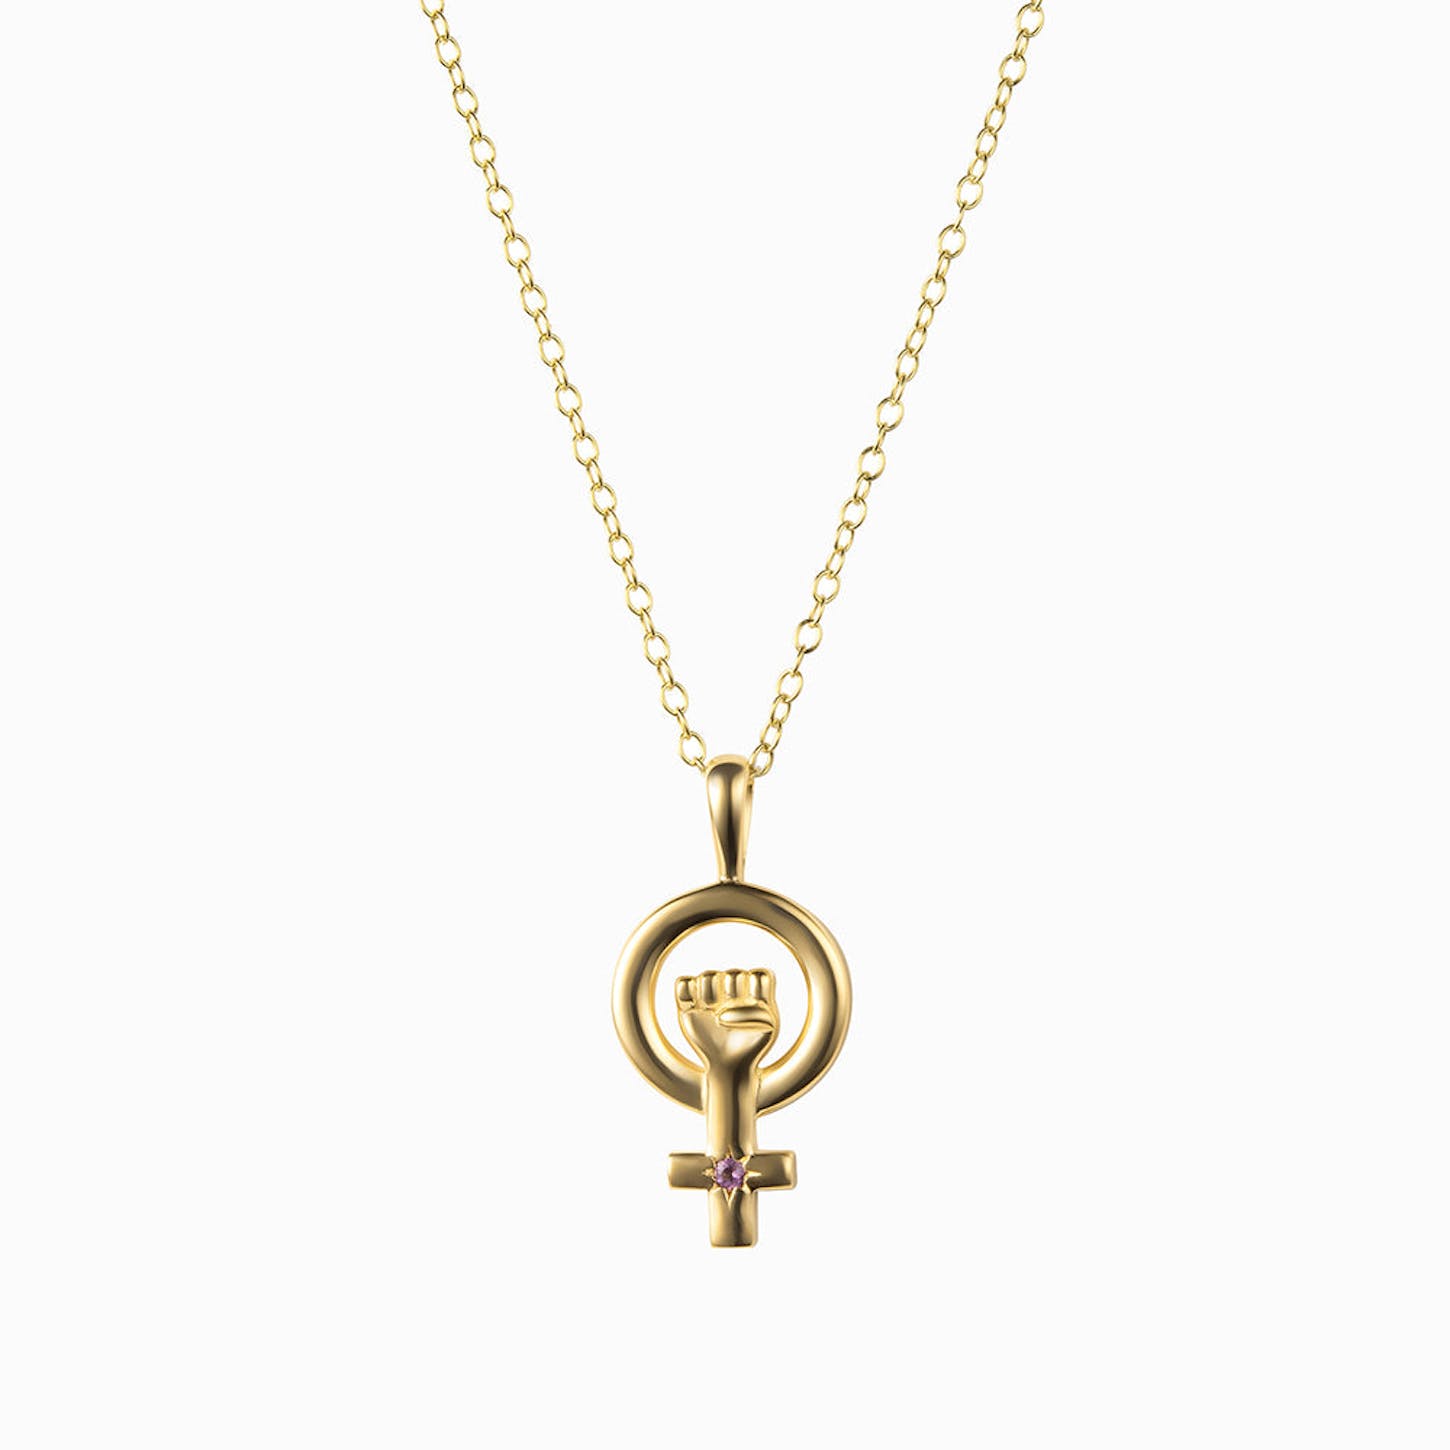 Awed Inspired + Woman Power Necklace